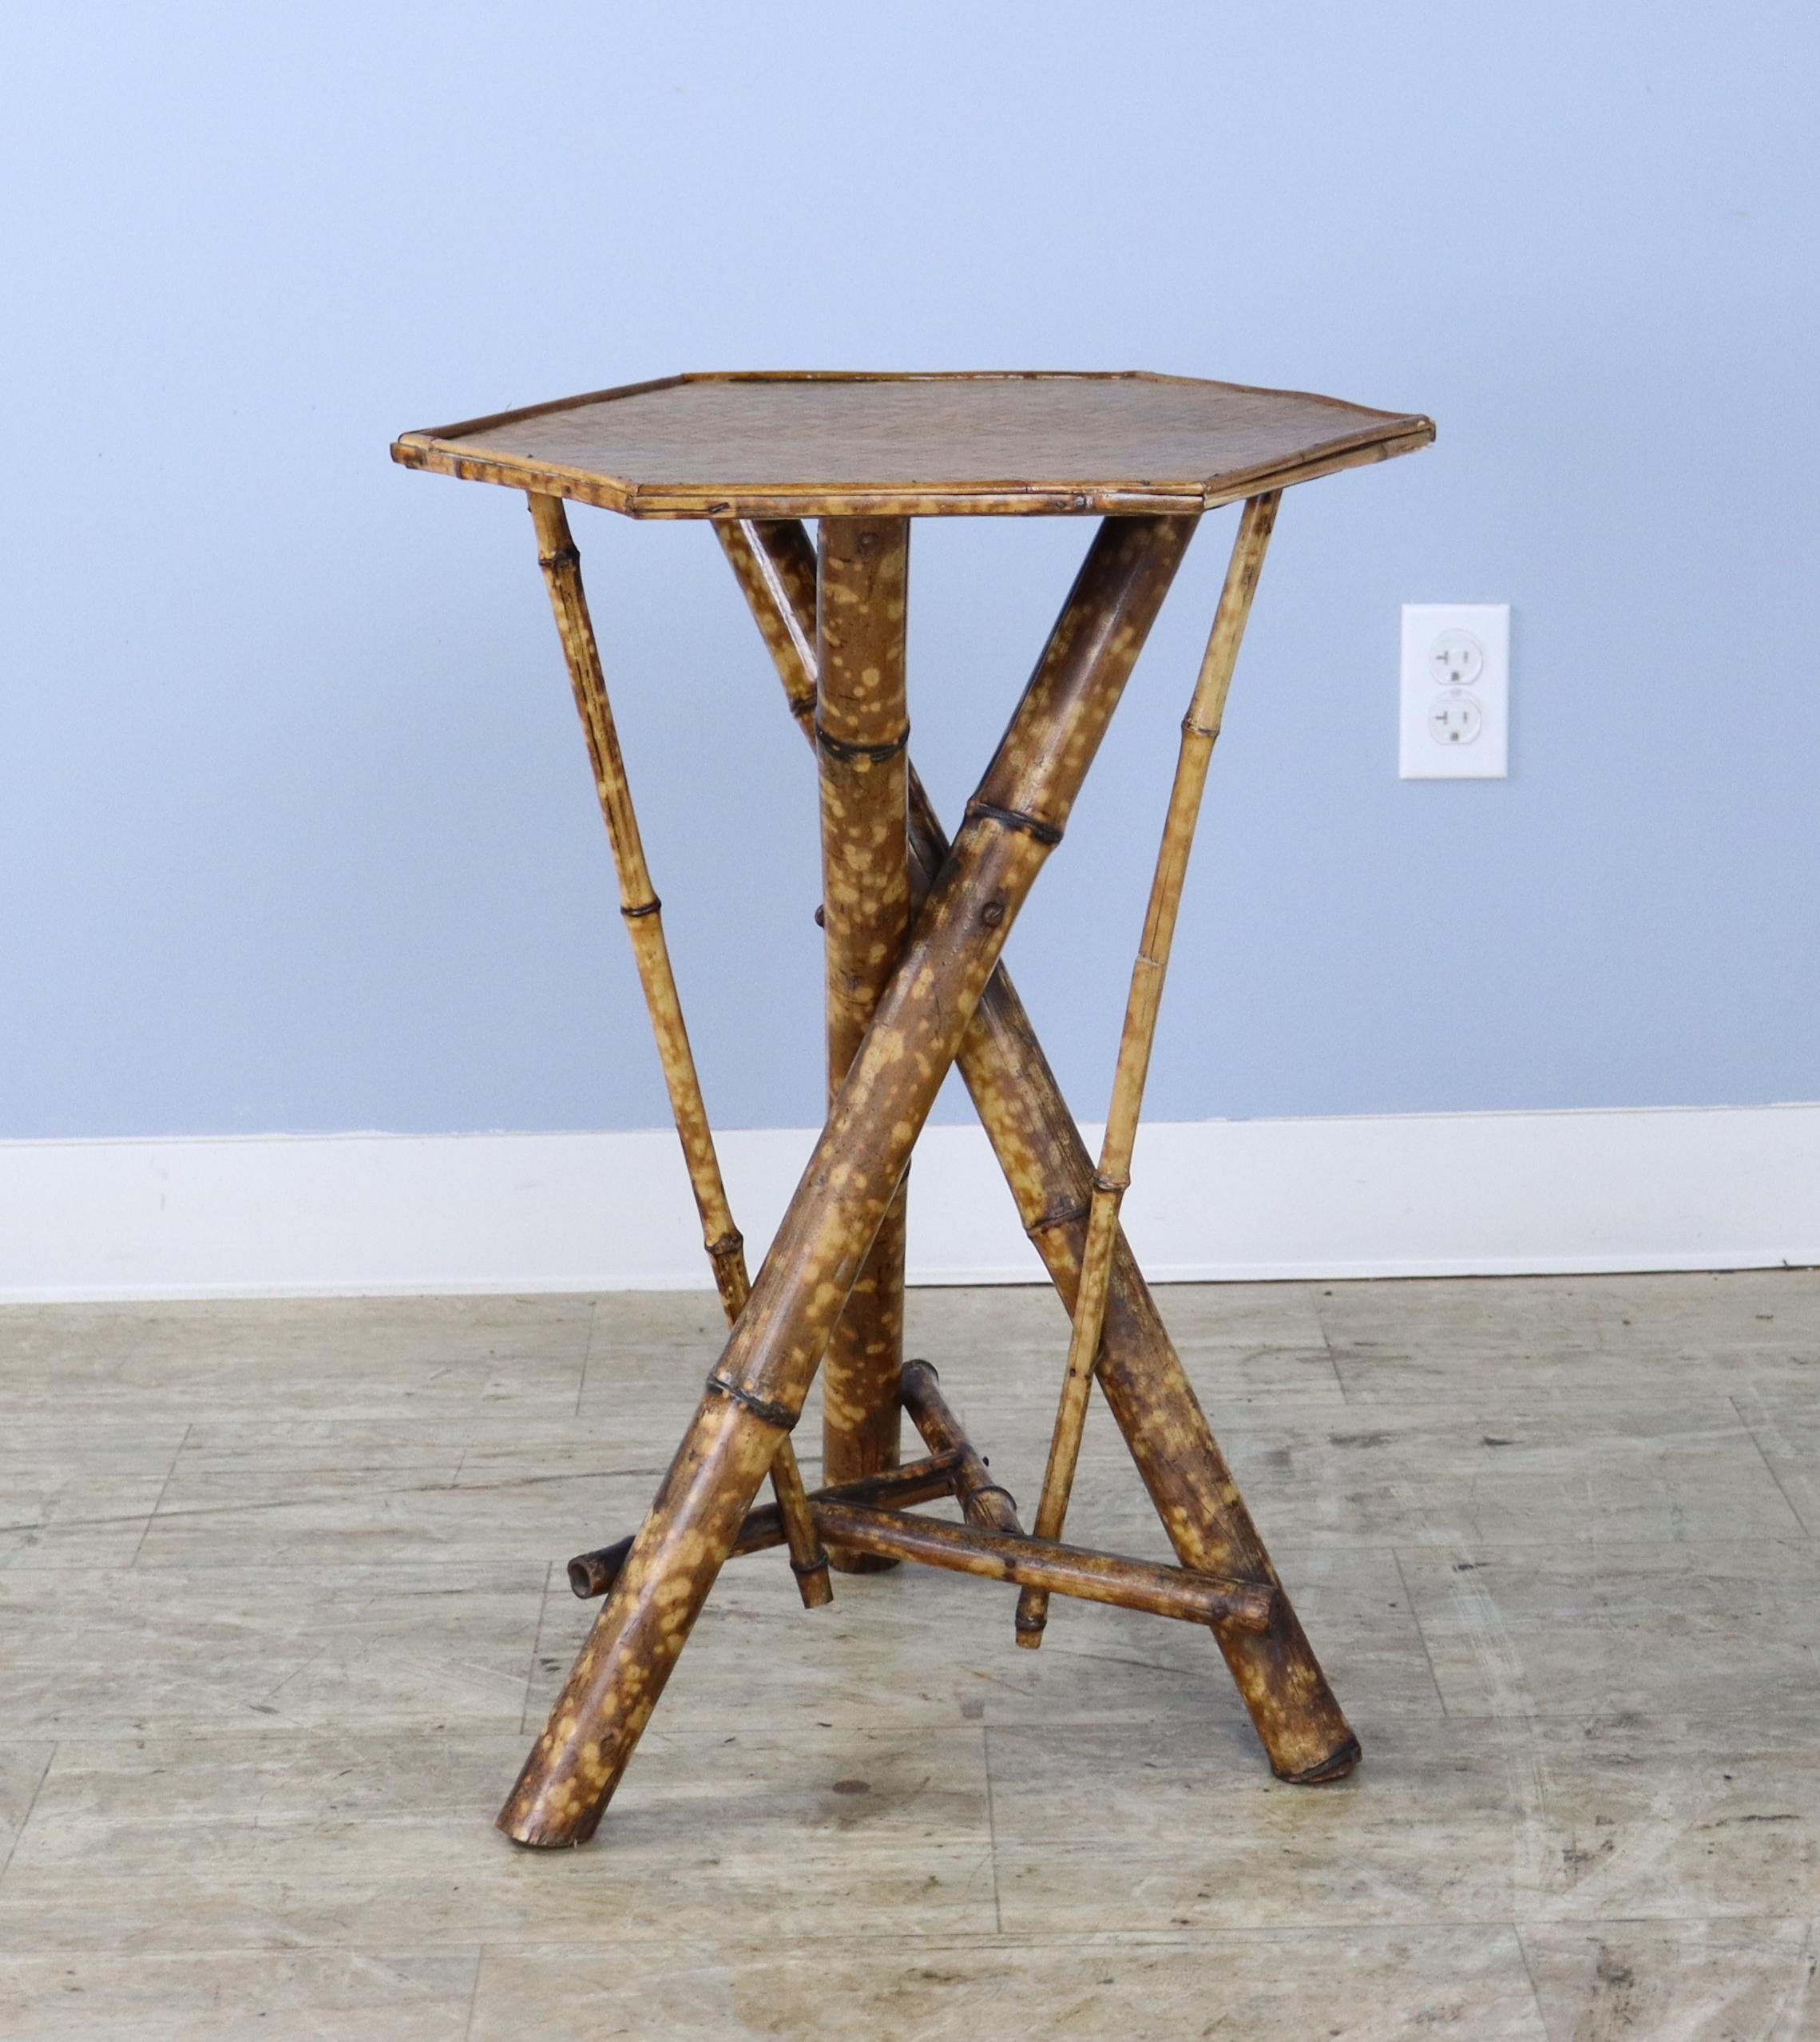 An antique English bamboo side table, with tripod legs and additional decorative supports. Attractive details on all sides. The top is made of tightly woven rattan that is in very good condition. The bamboo, vividly painted, is in good sturdy